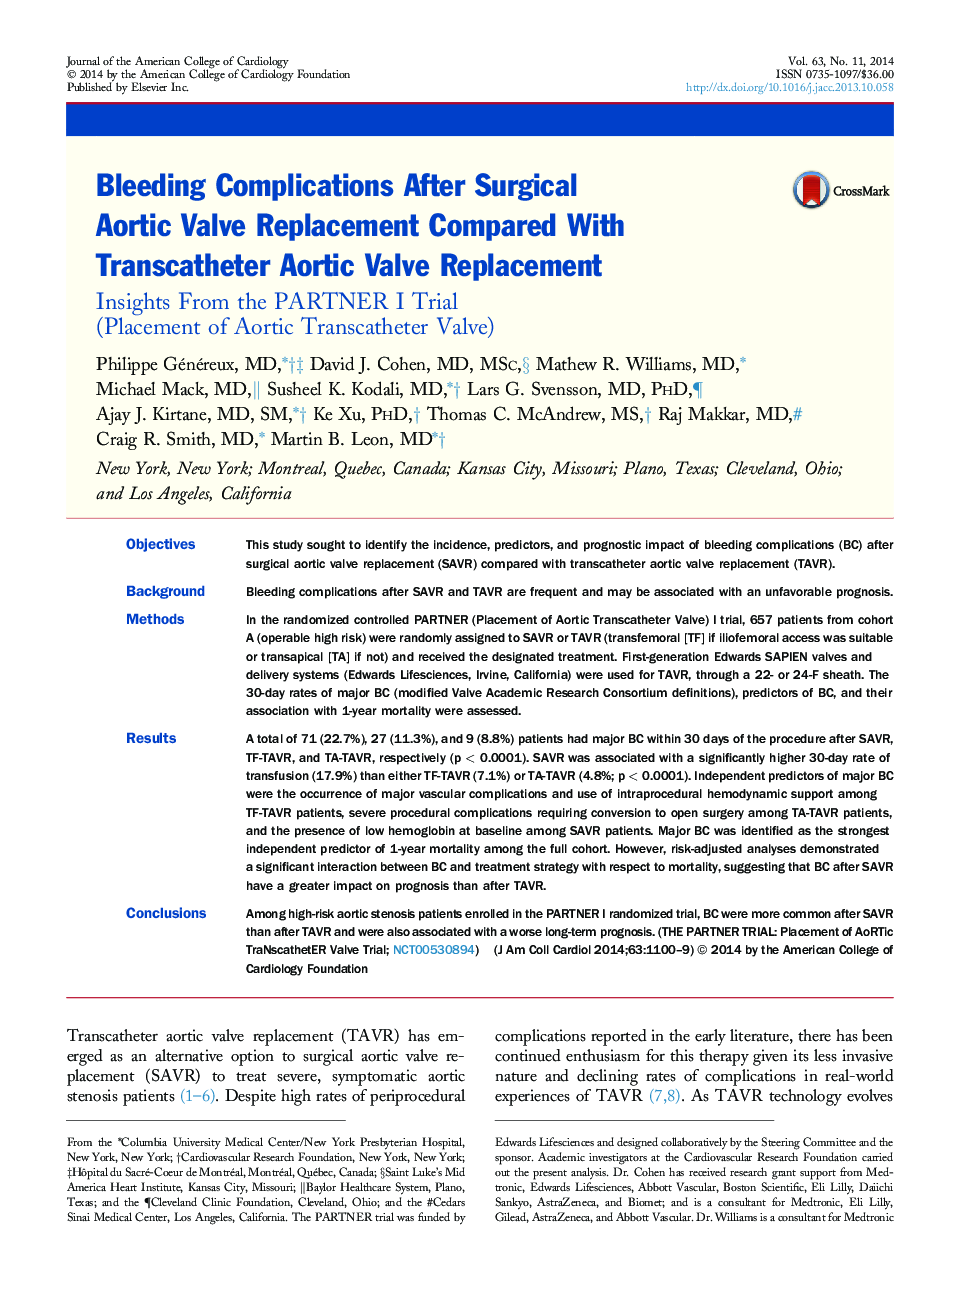 Bleeding Complications After Surgical Aortic Valve Replacement Compared With Transcatheter Aortic Valve Replacement : Insights From the PARTNER I Trial (Placement of Aortic Transcatheter Valve)